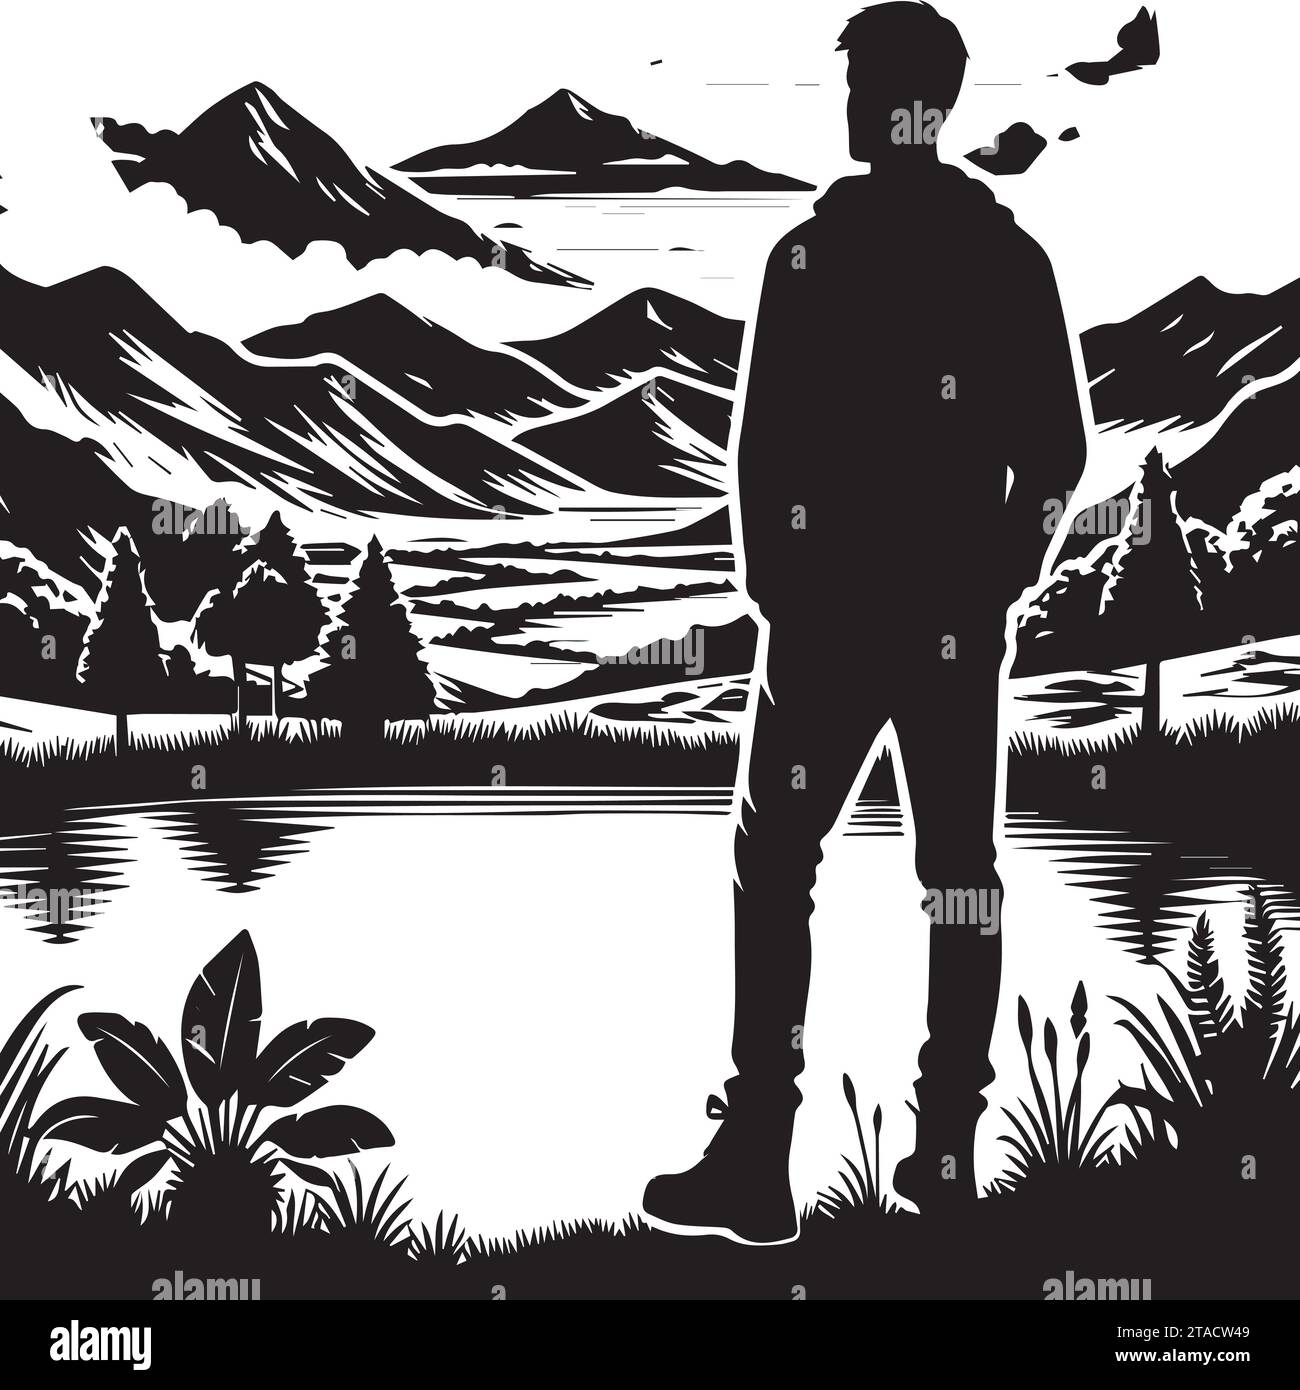 Simple hand-drawn vector drawing in black outline. Lake shore, reeds,  stones in the water, bumps, swamp. Nature, landscape, duck hunting, fishing.  Ink sketch. Stock Vector